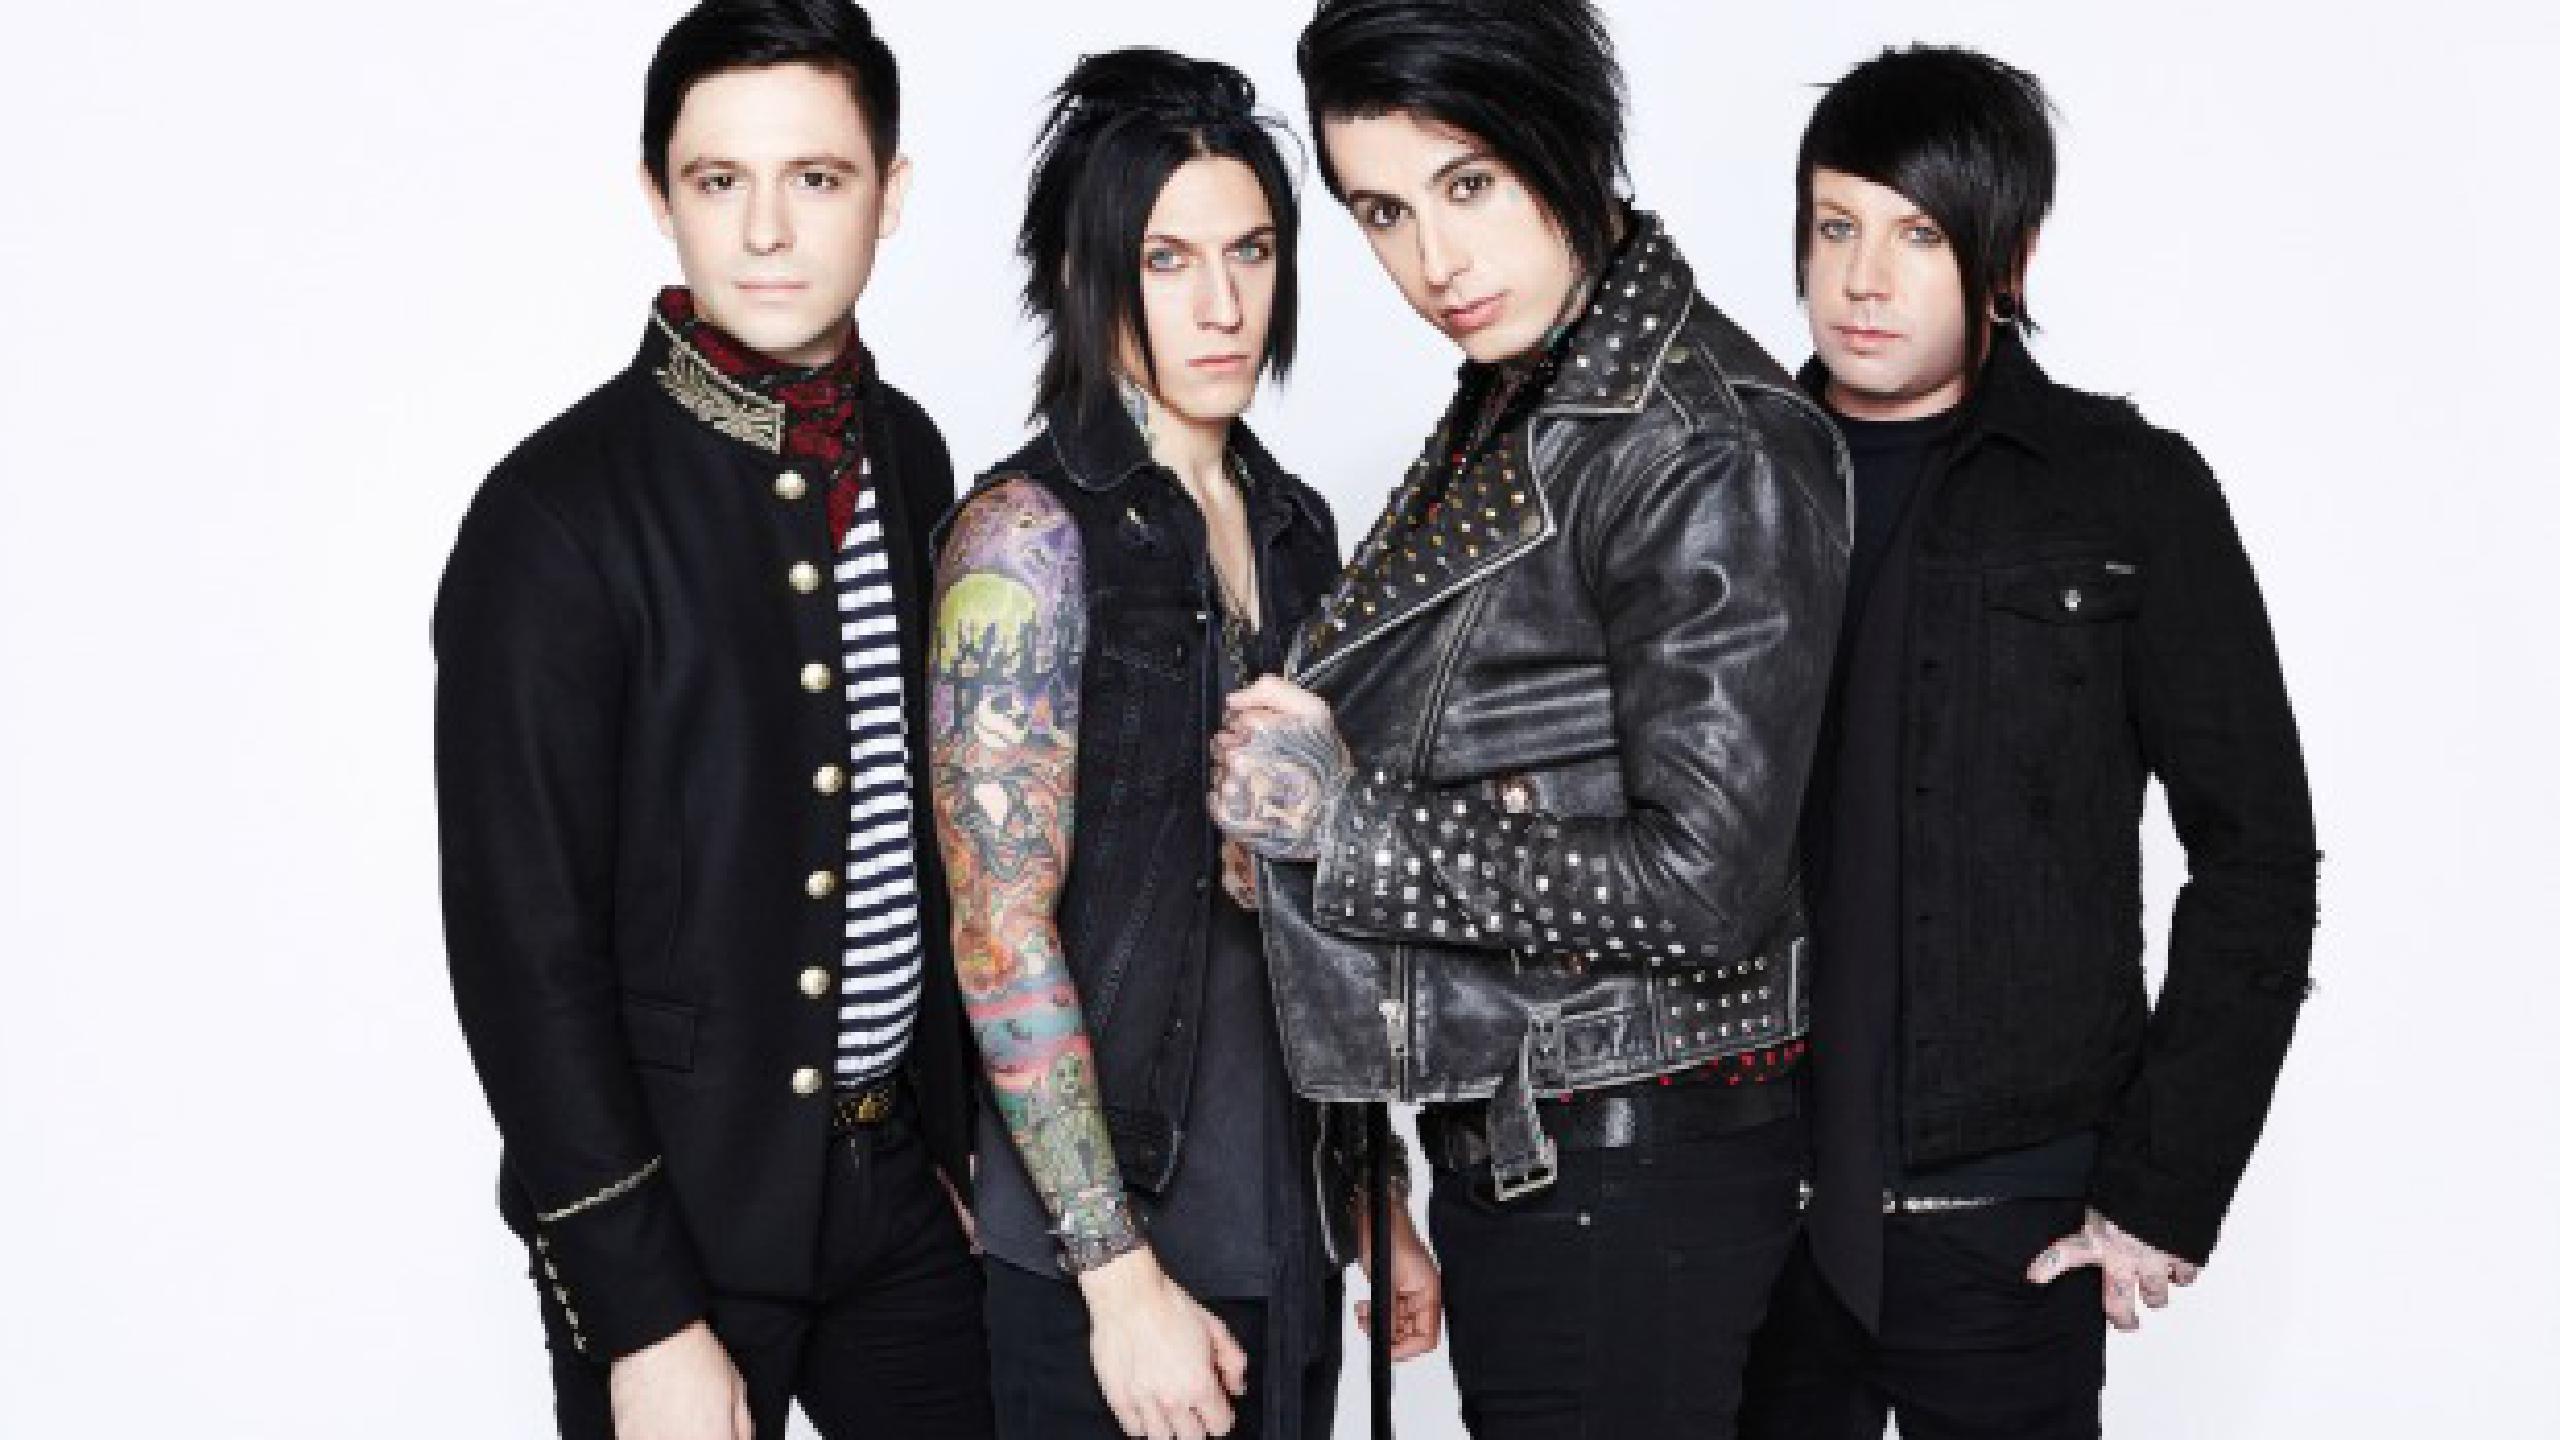 Falling In Reverse tour dates 2022 2023. Falling In Reverse tickets and